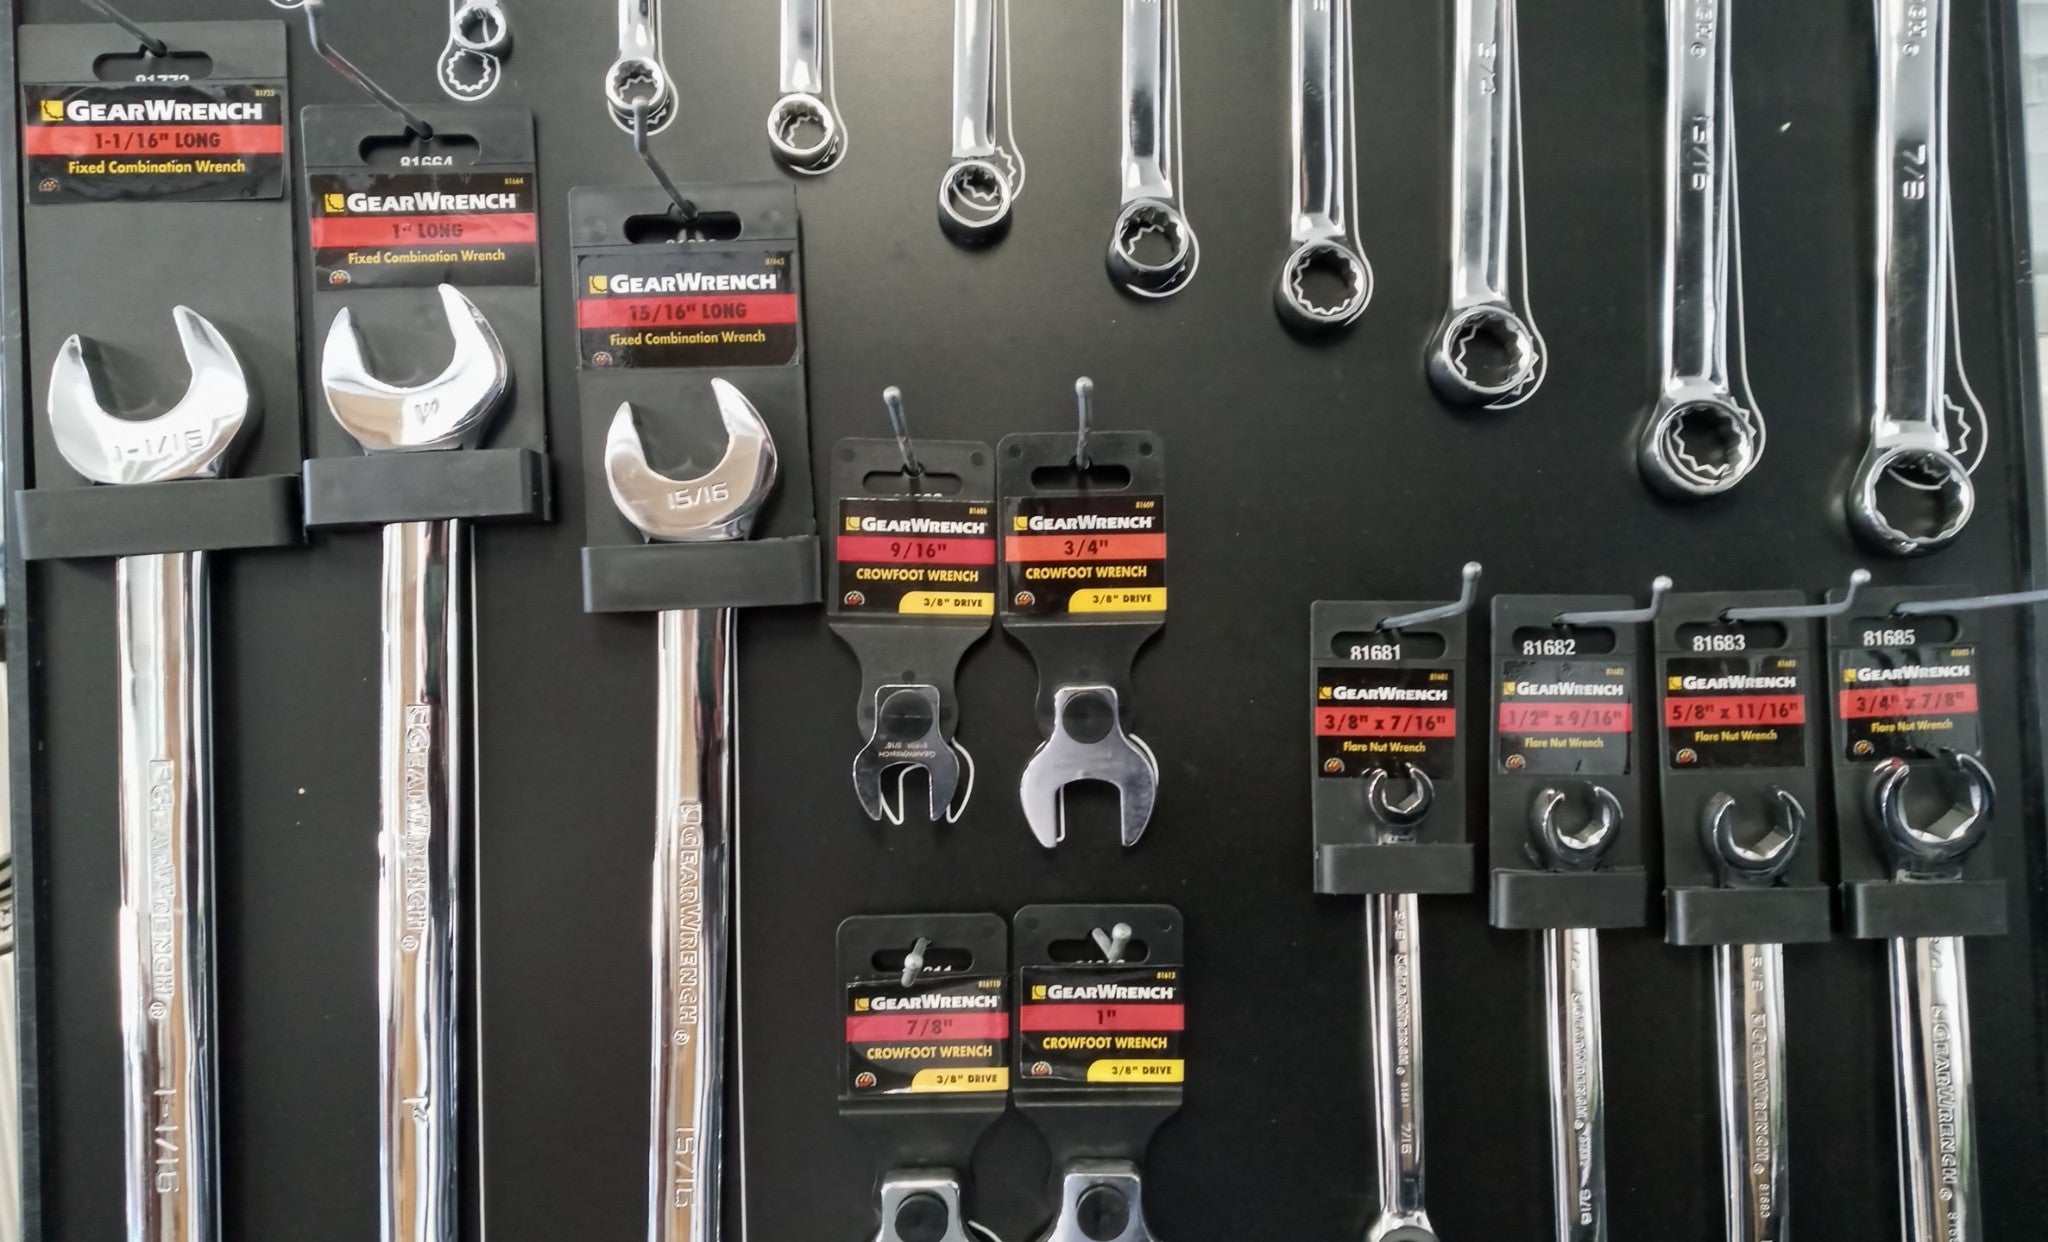 GearWrench 81430 Merchandiser Wall Display 22-Peice Wrench Set